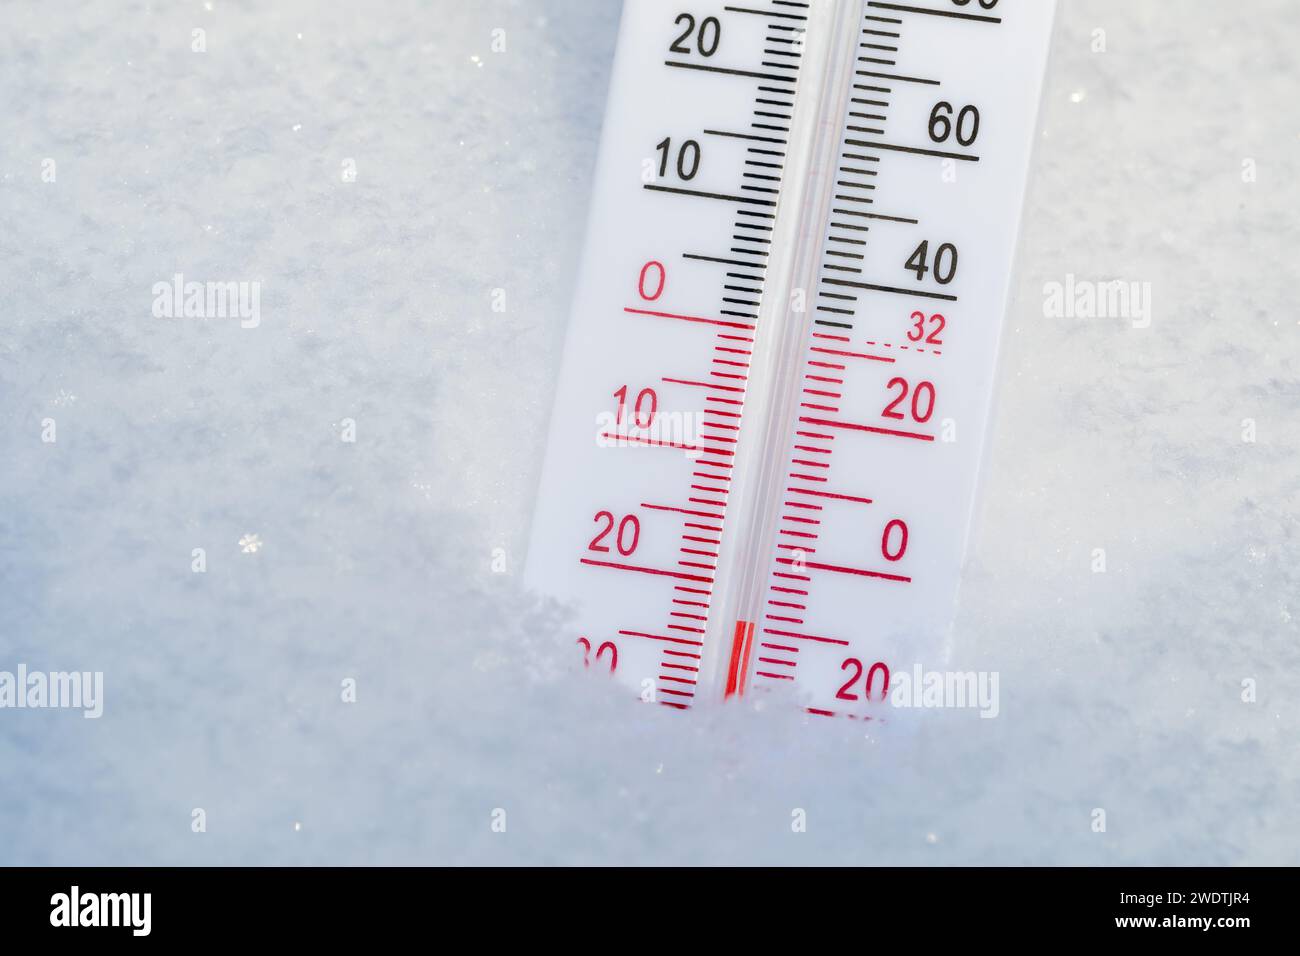 Thermometer with both Celsius and Fahrenheit scales placed in fresh snow indicating very cold winter temperature Stock Photo